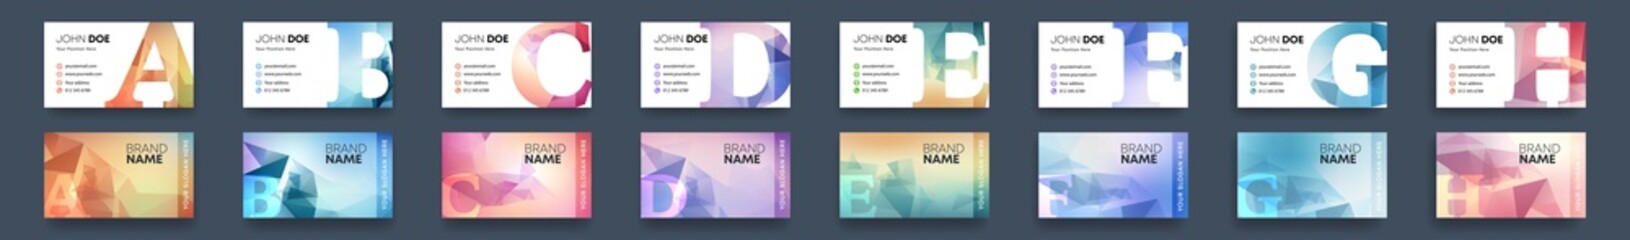 Fototapeta Vector modern business card design template bundle set with colorful polygonal background and letter design element. Best corporate style layout obraz